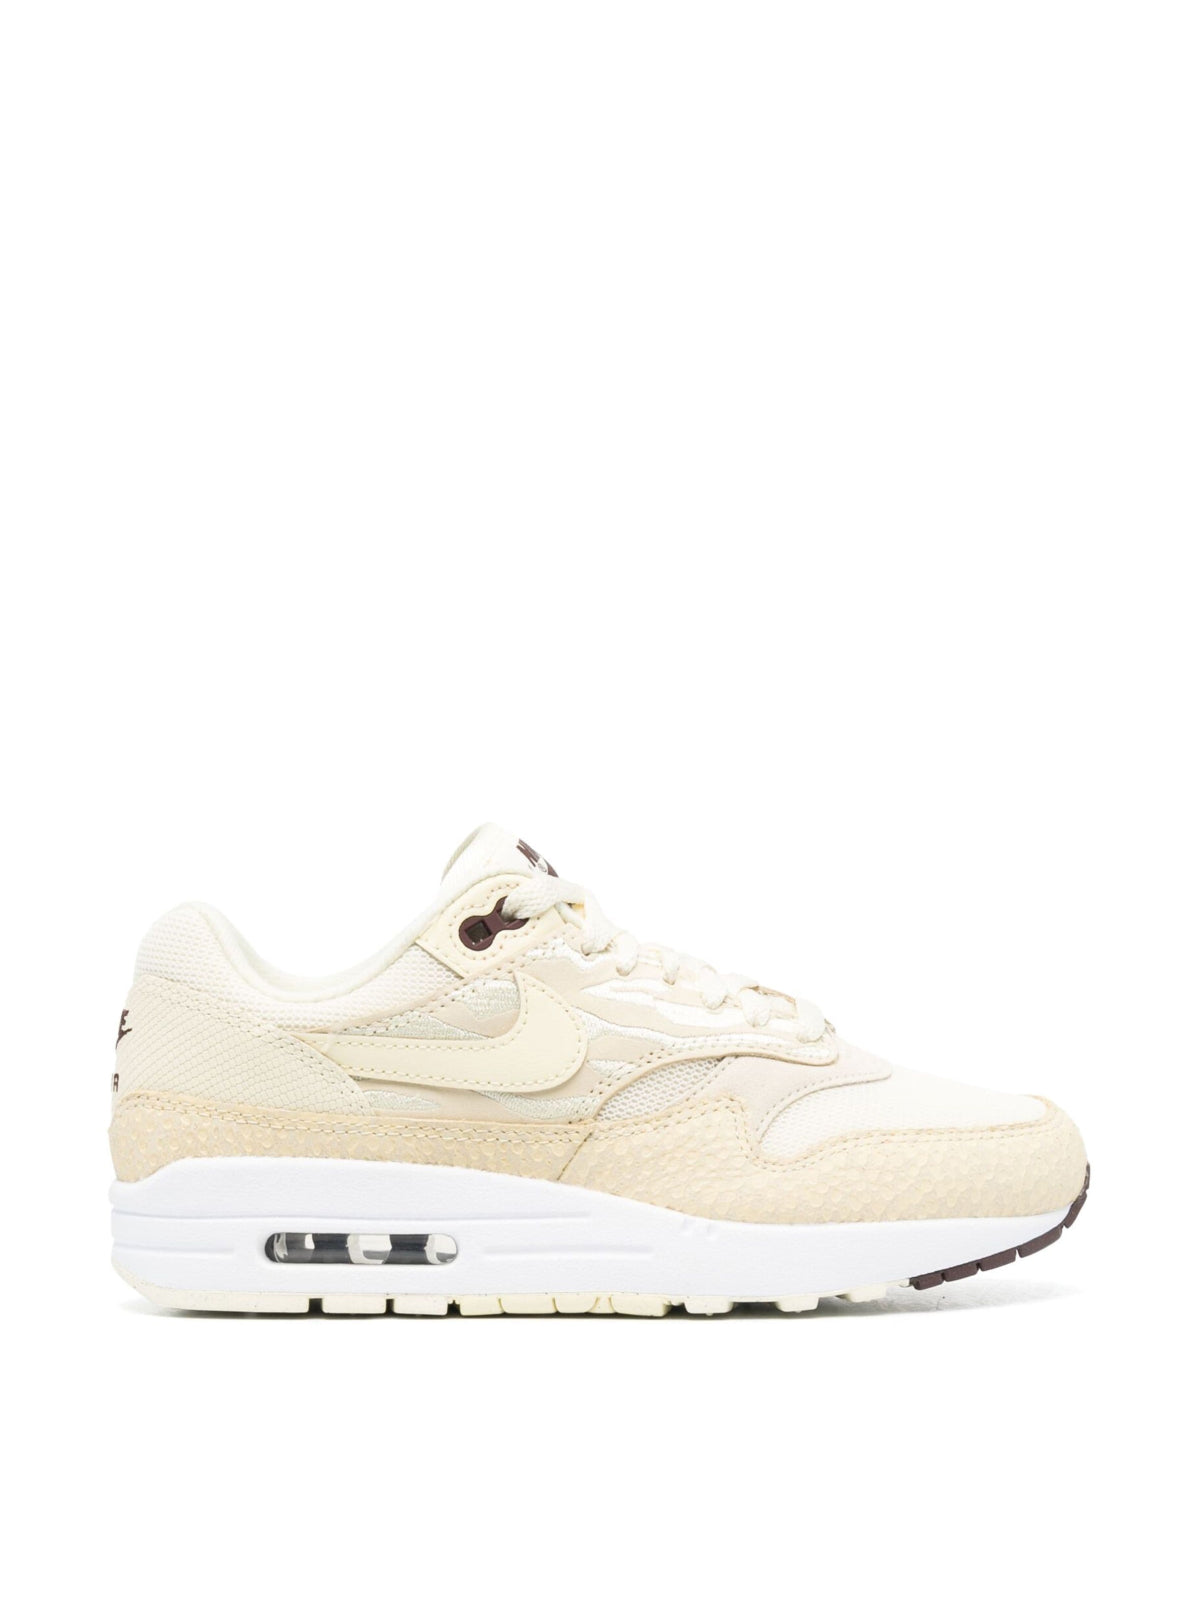 Nike-OUTLET-SALE-Air Max 1 87 Coconut Milk Sneakers-ARCHIVIST